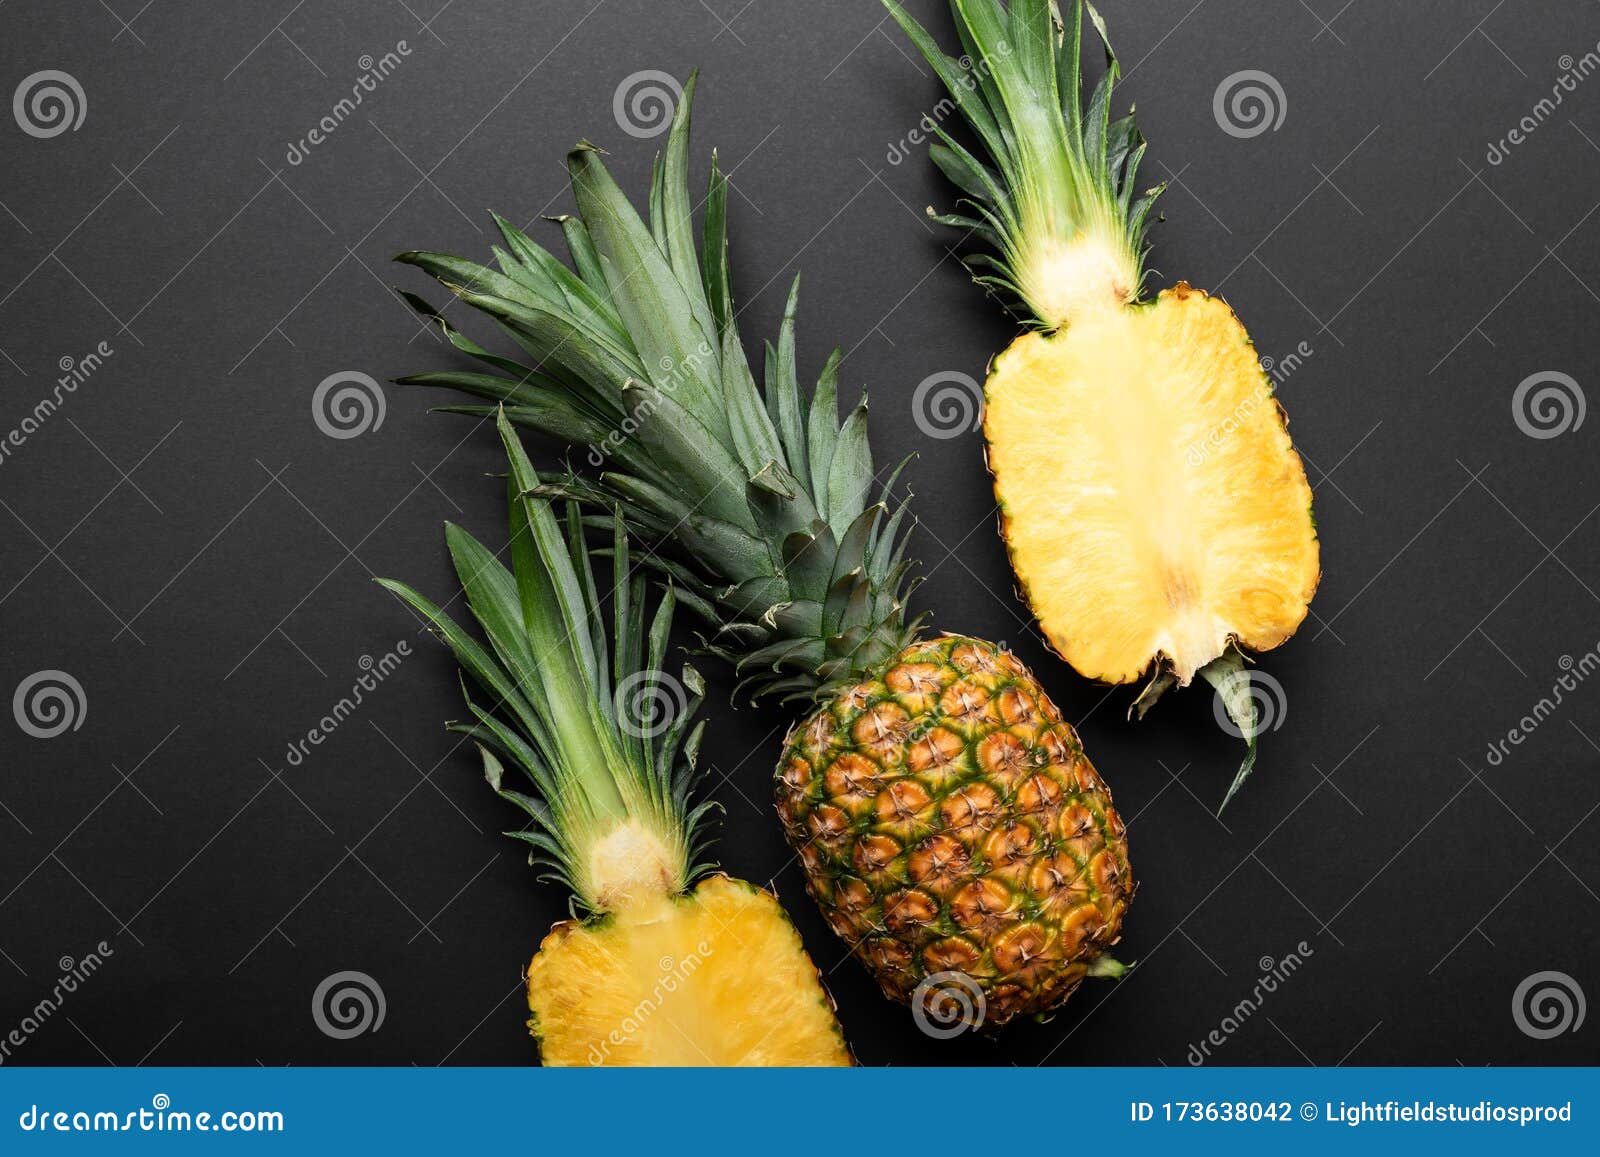 top view of ripe yellow pineapples